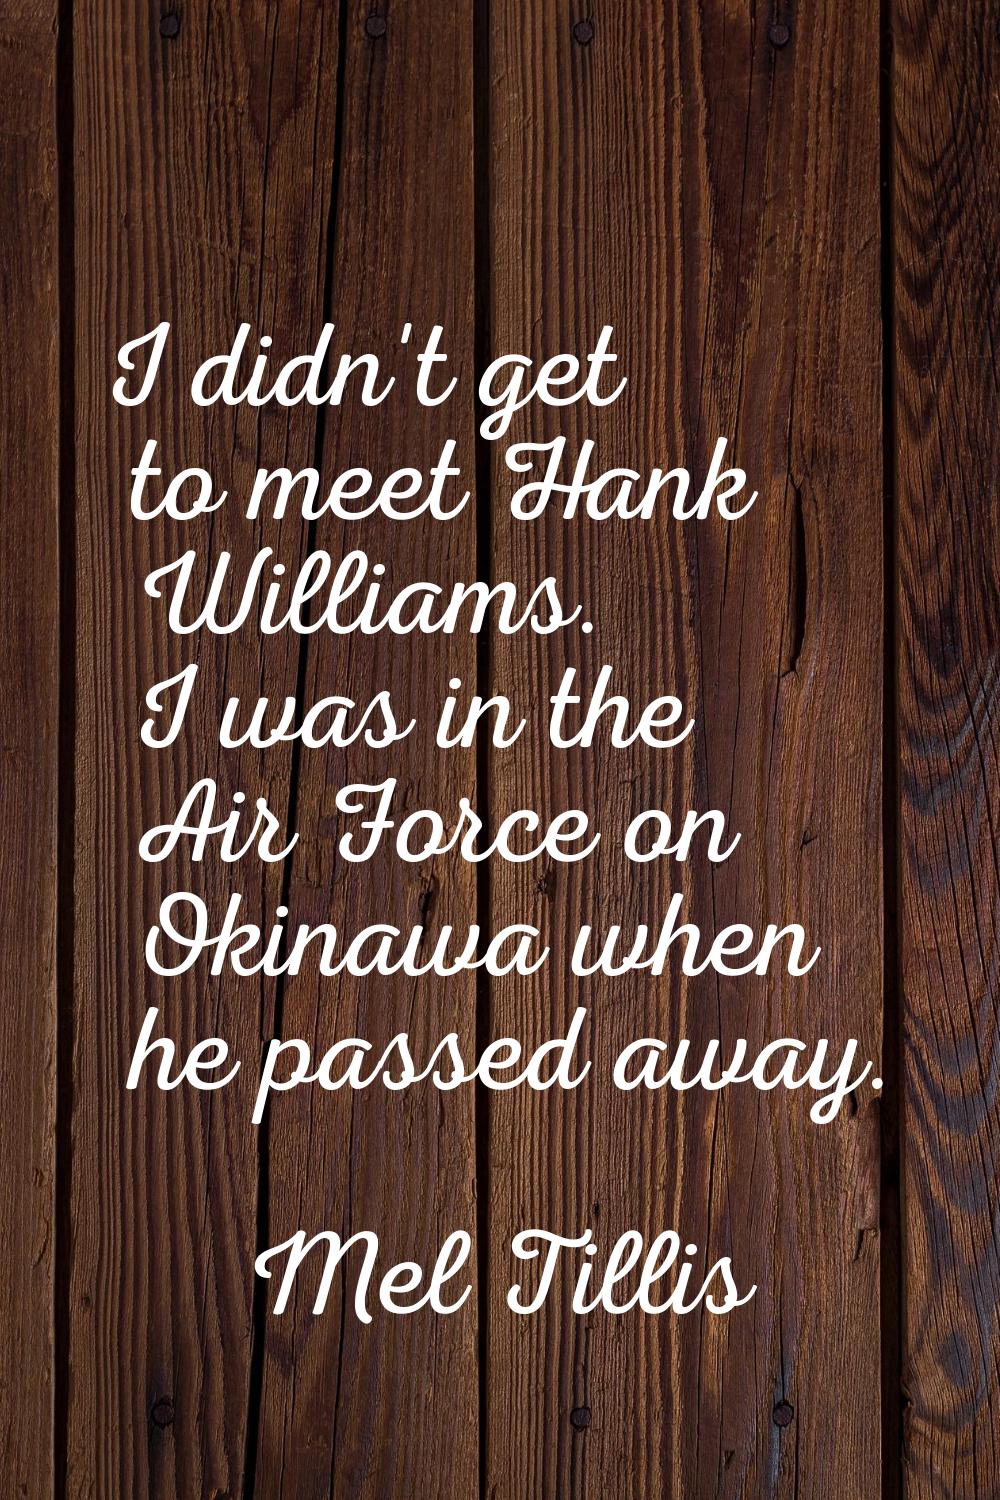 I didn't get to meet Hank Williams. I was in the Air Force on Okinawa when he passed away.